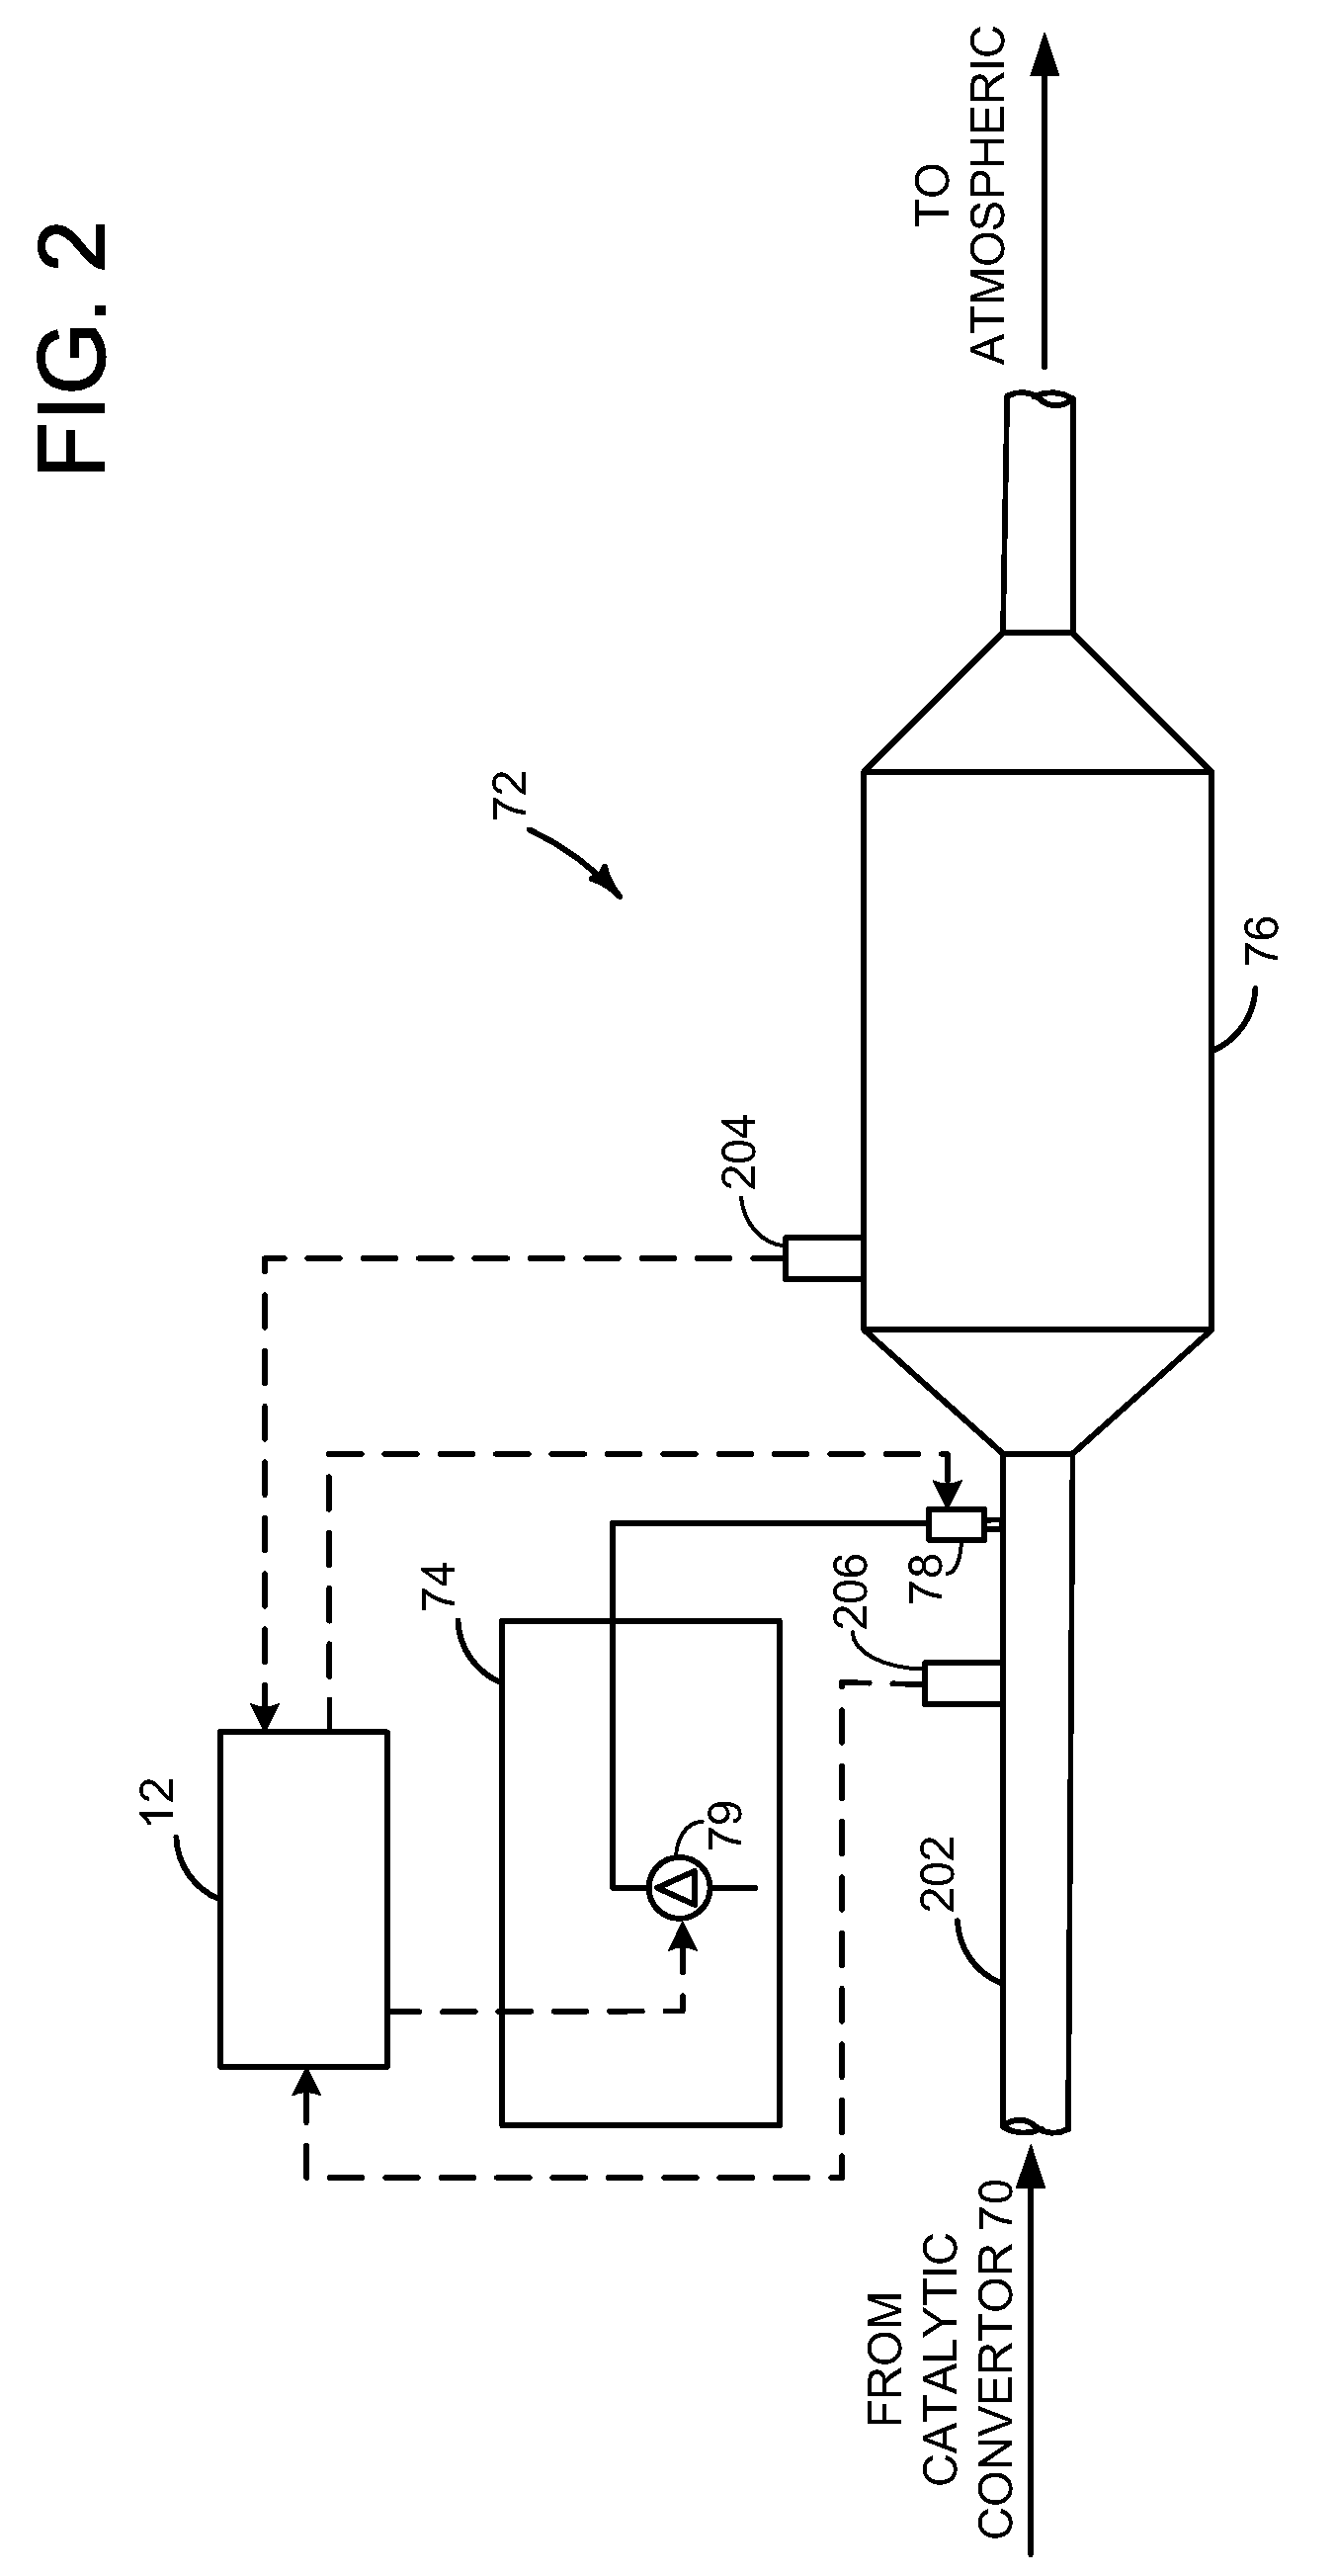 Managing Reductant Slip in an Internal Combustion Engine